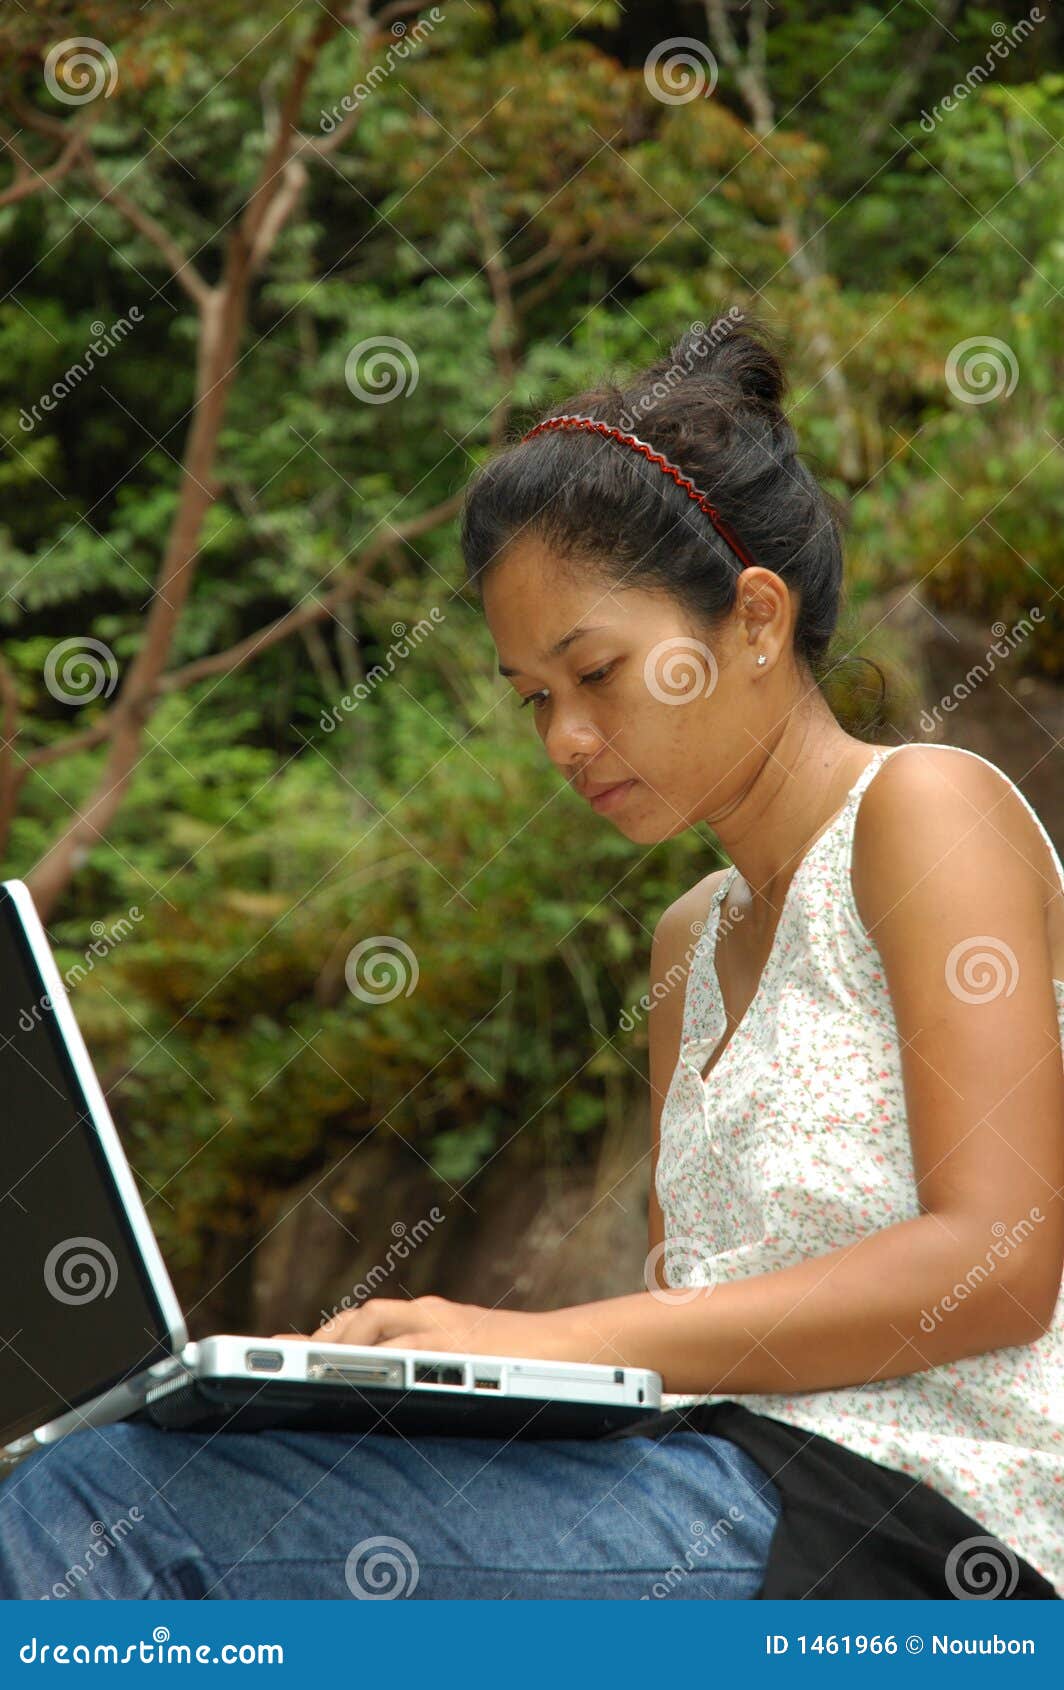 Girl On Vacation Using Laptop Computer Outside Stock Photo ...